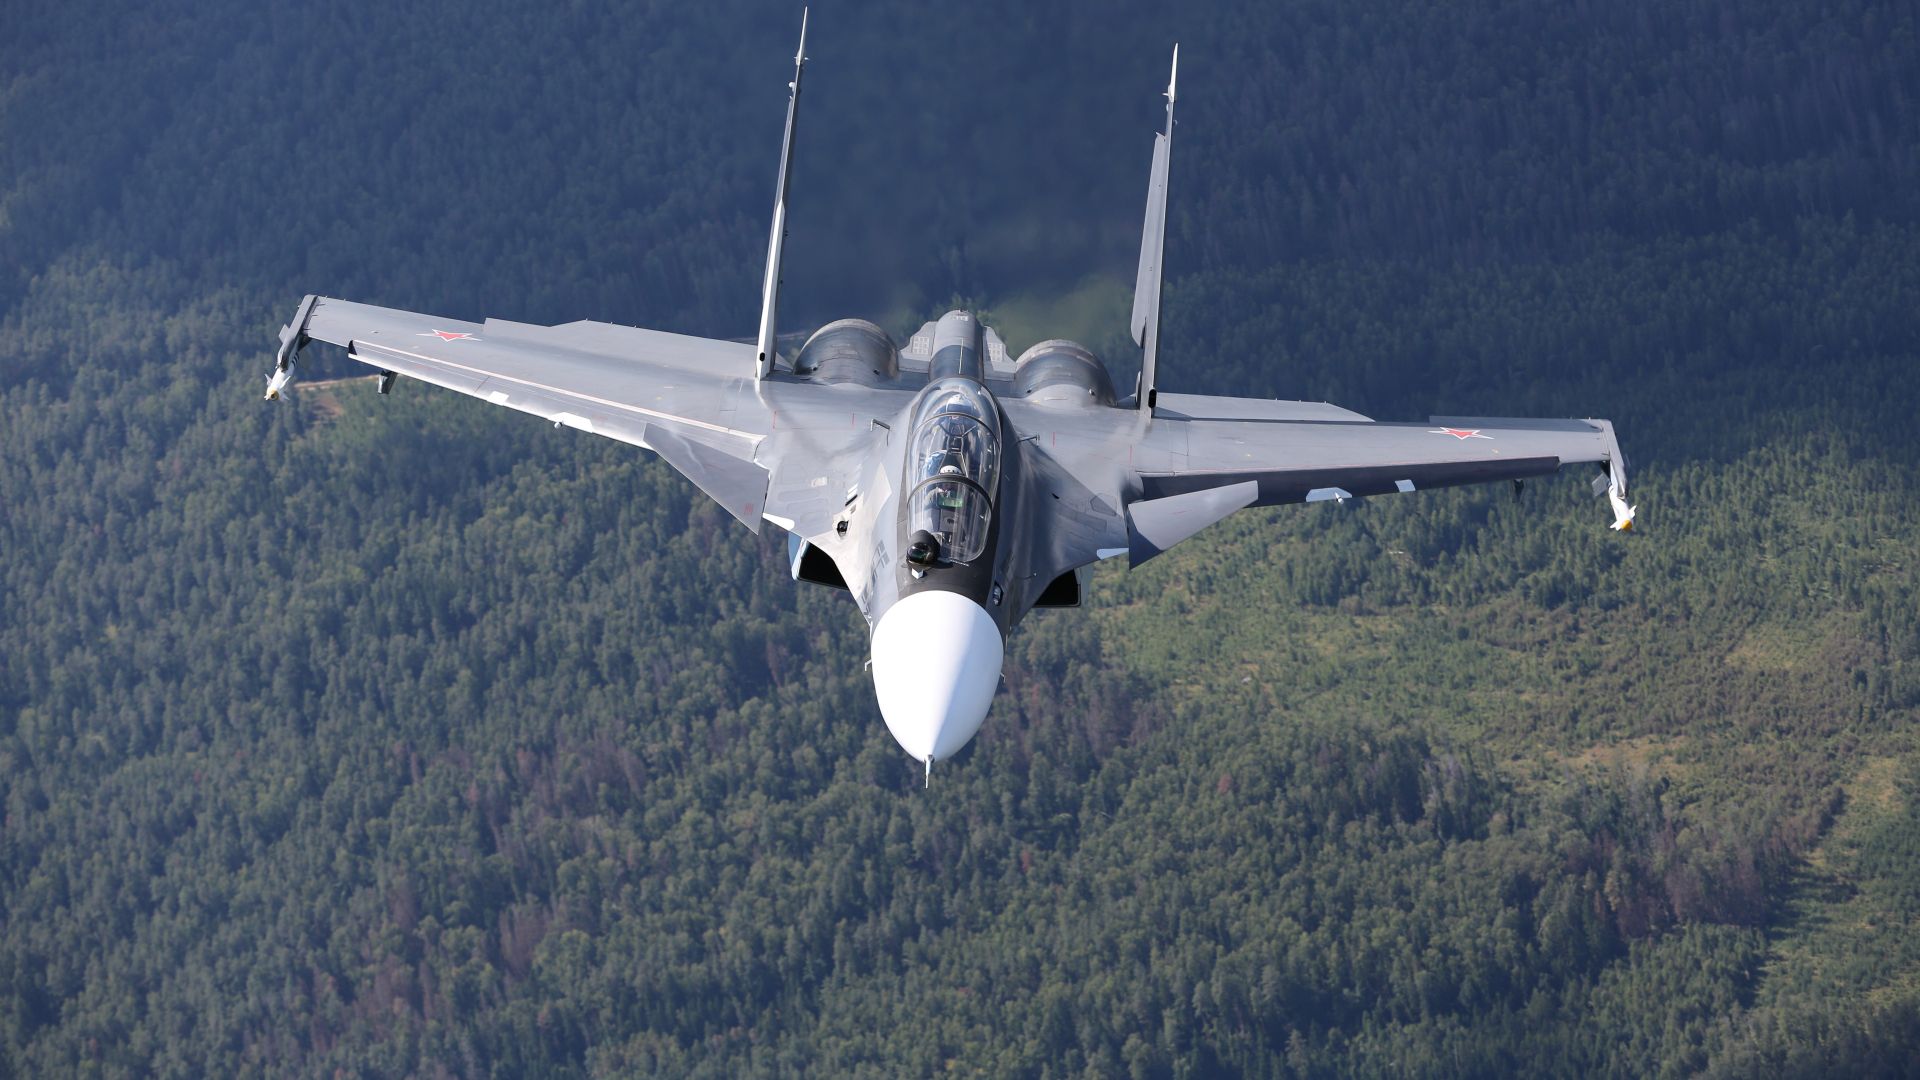 Sukhoi Su34 Military Aircraft Images Hd Wallpapers For Desktop 3840x2160   Wallpapers13com